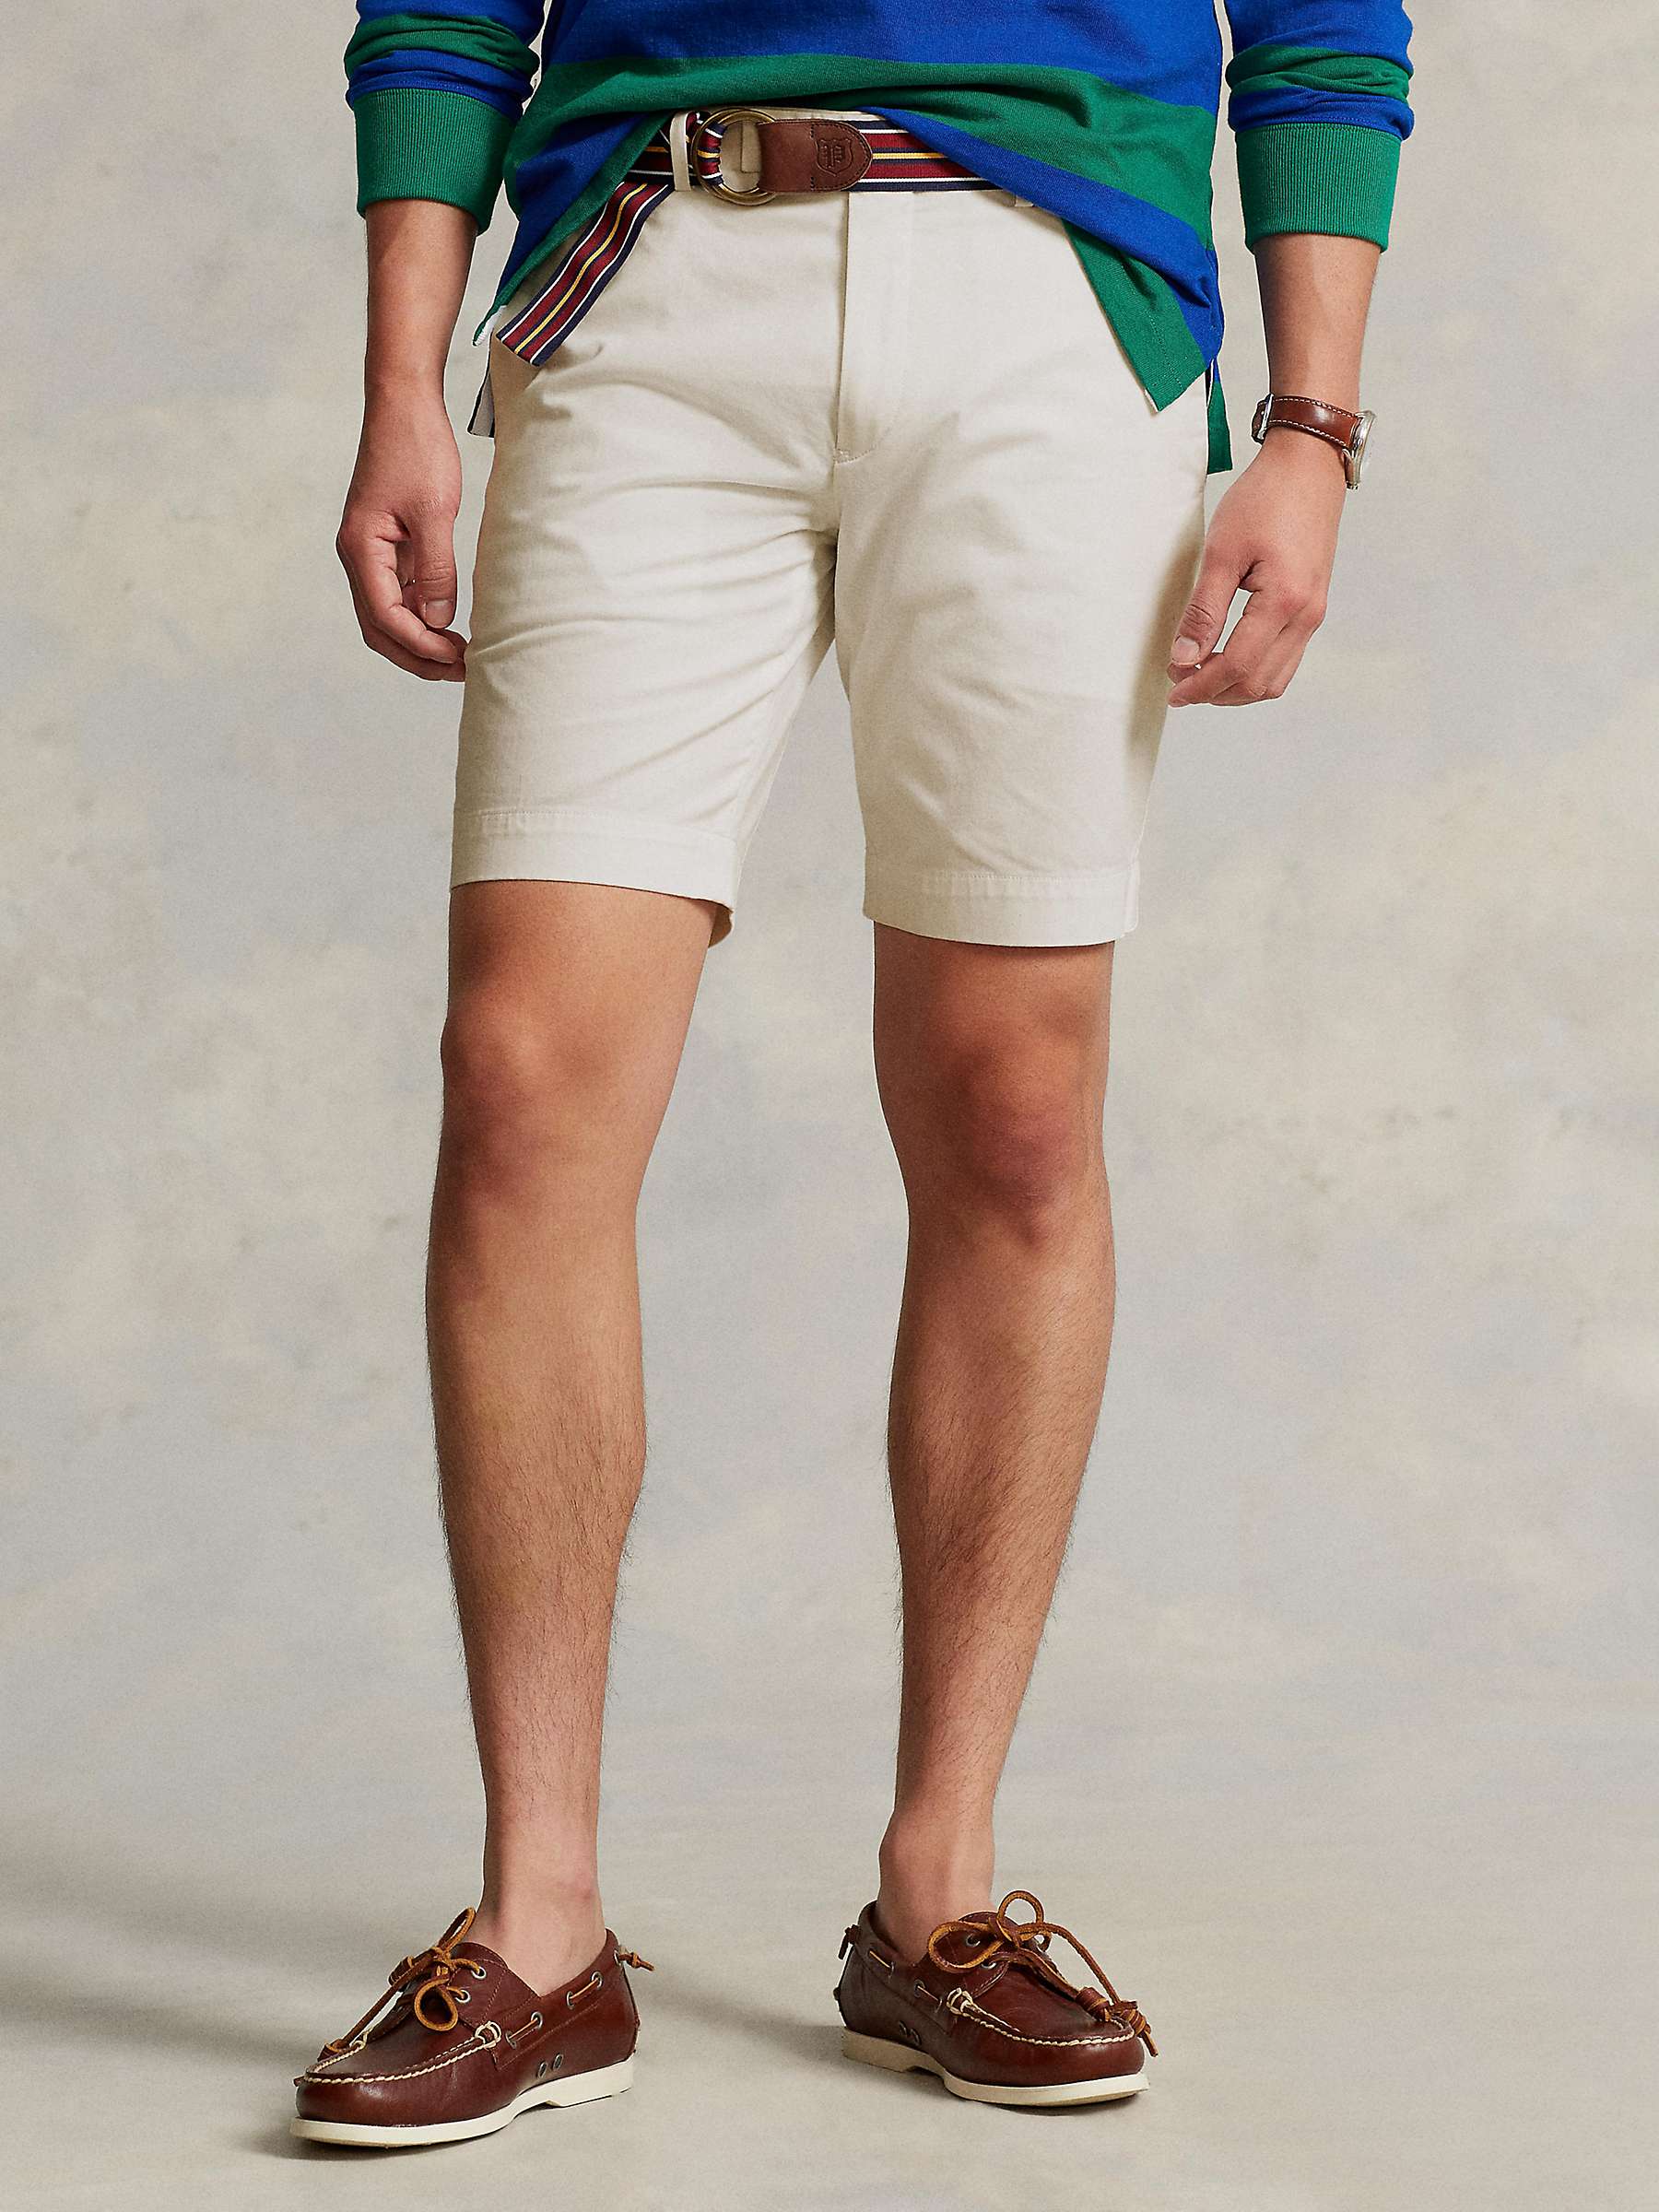 Buy Polo Ralph Lauren Stretch Slim Fit Chino Shorts Online at johnlewis.com